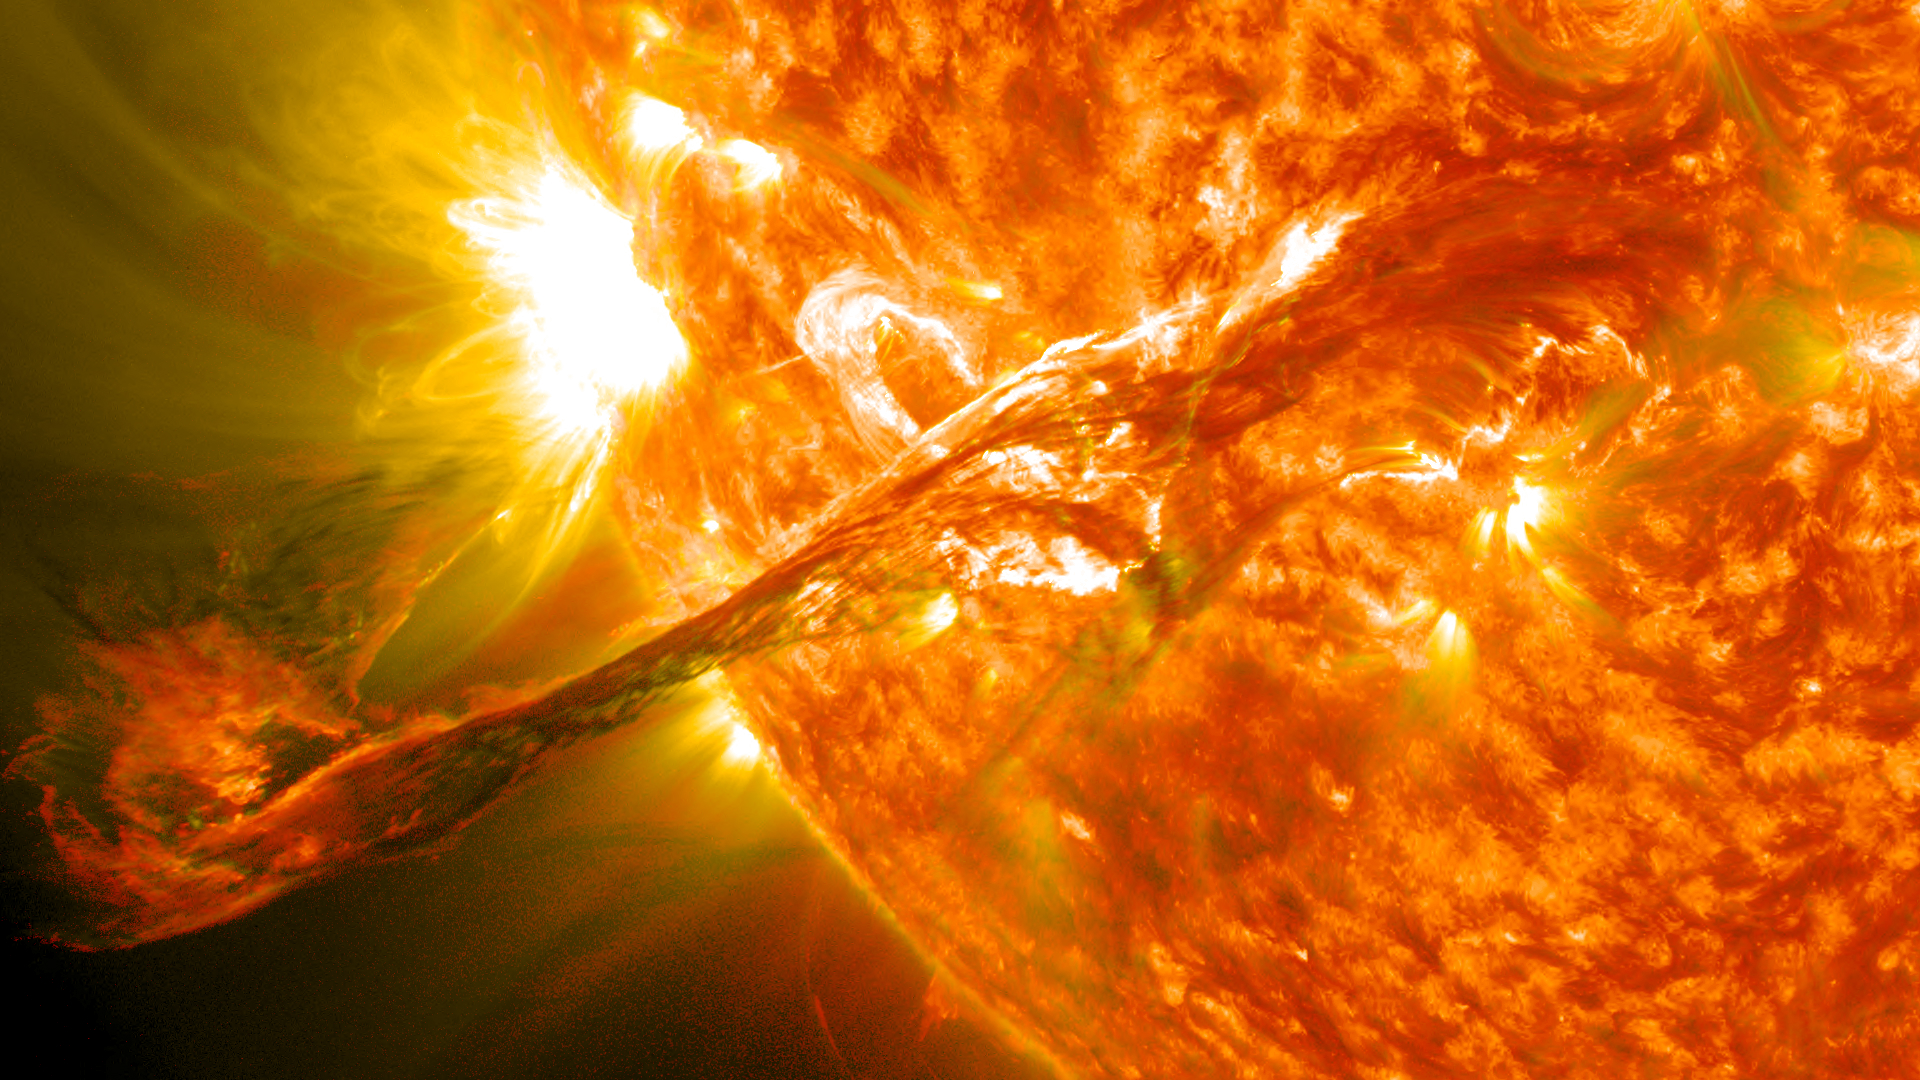 This coronal mass ejection, captured by NASA’s Solar Dynamics Observatory, erupted on the Sun Aug. 31, 2012, traveling over 900 miles per second and sending radiation deep into space. Earth’s magnetic field shields it from radiation produced by solar events like this one, while Mars lacks that kind of shielding.